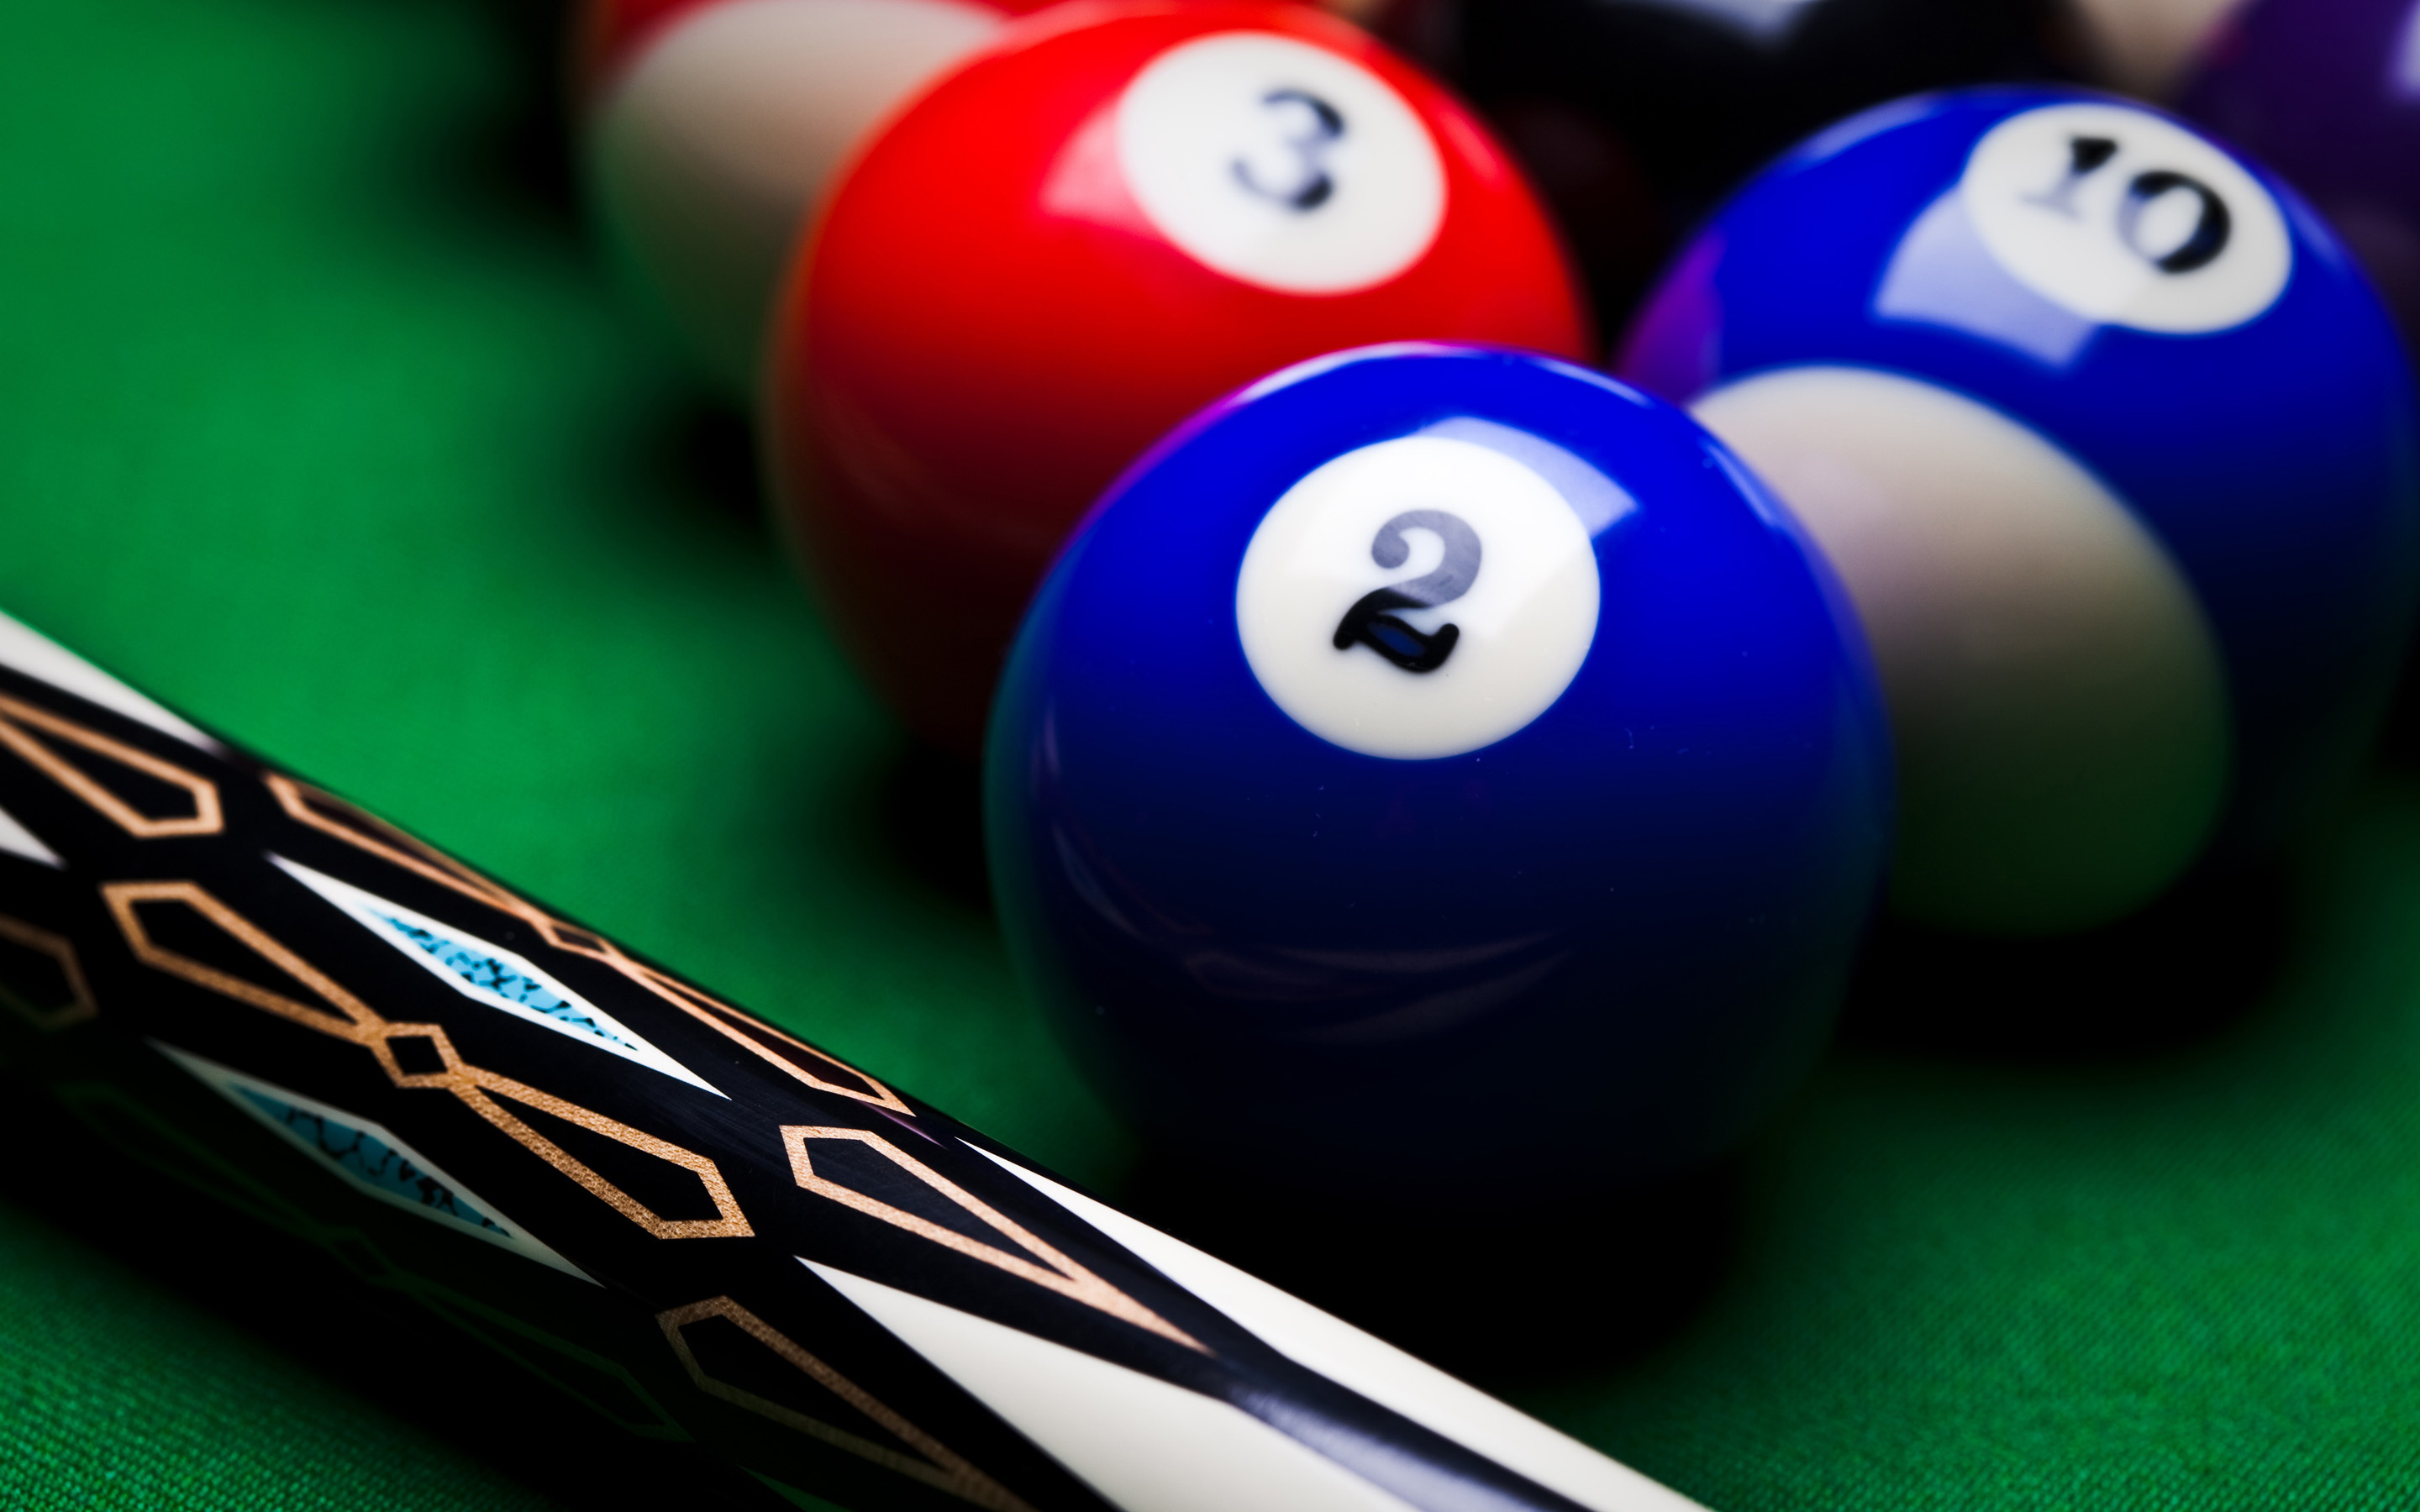 Pool (Cue Sports): Eight-ball, A classic American-style game for a good recreational activity. 2880x1800 HD Background.